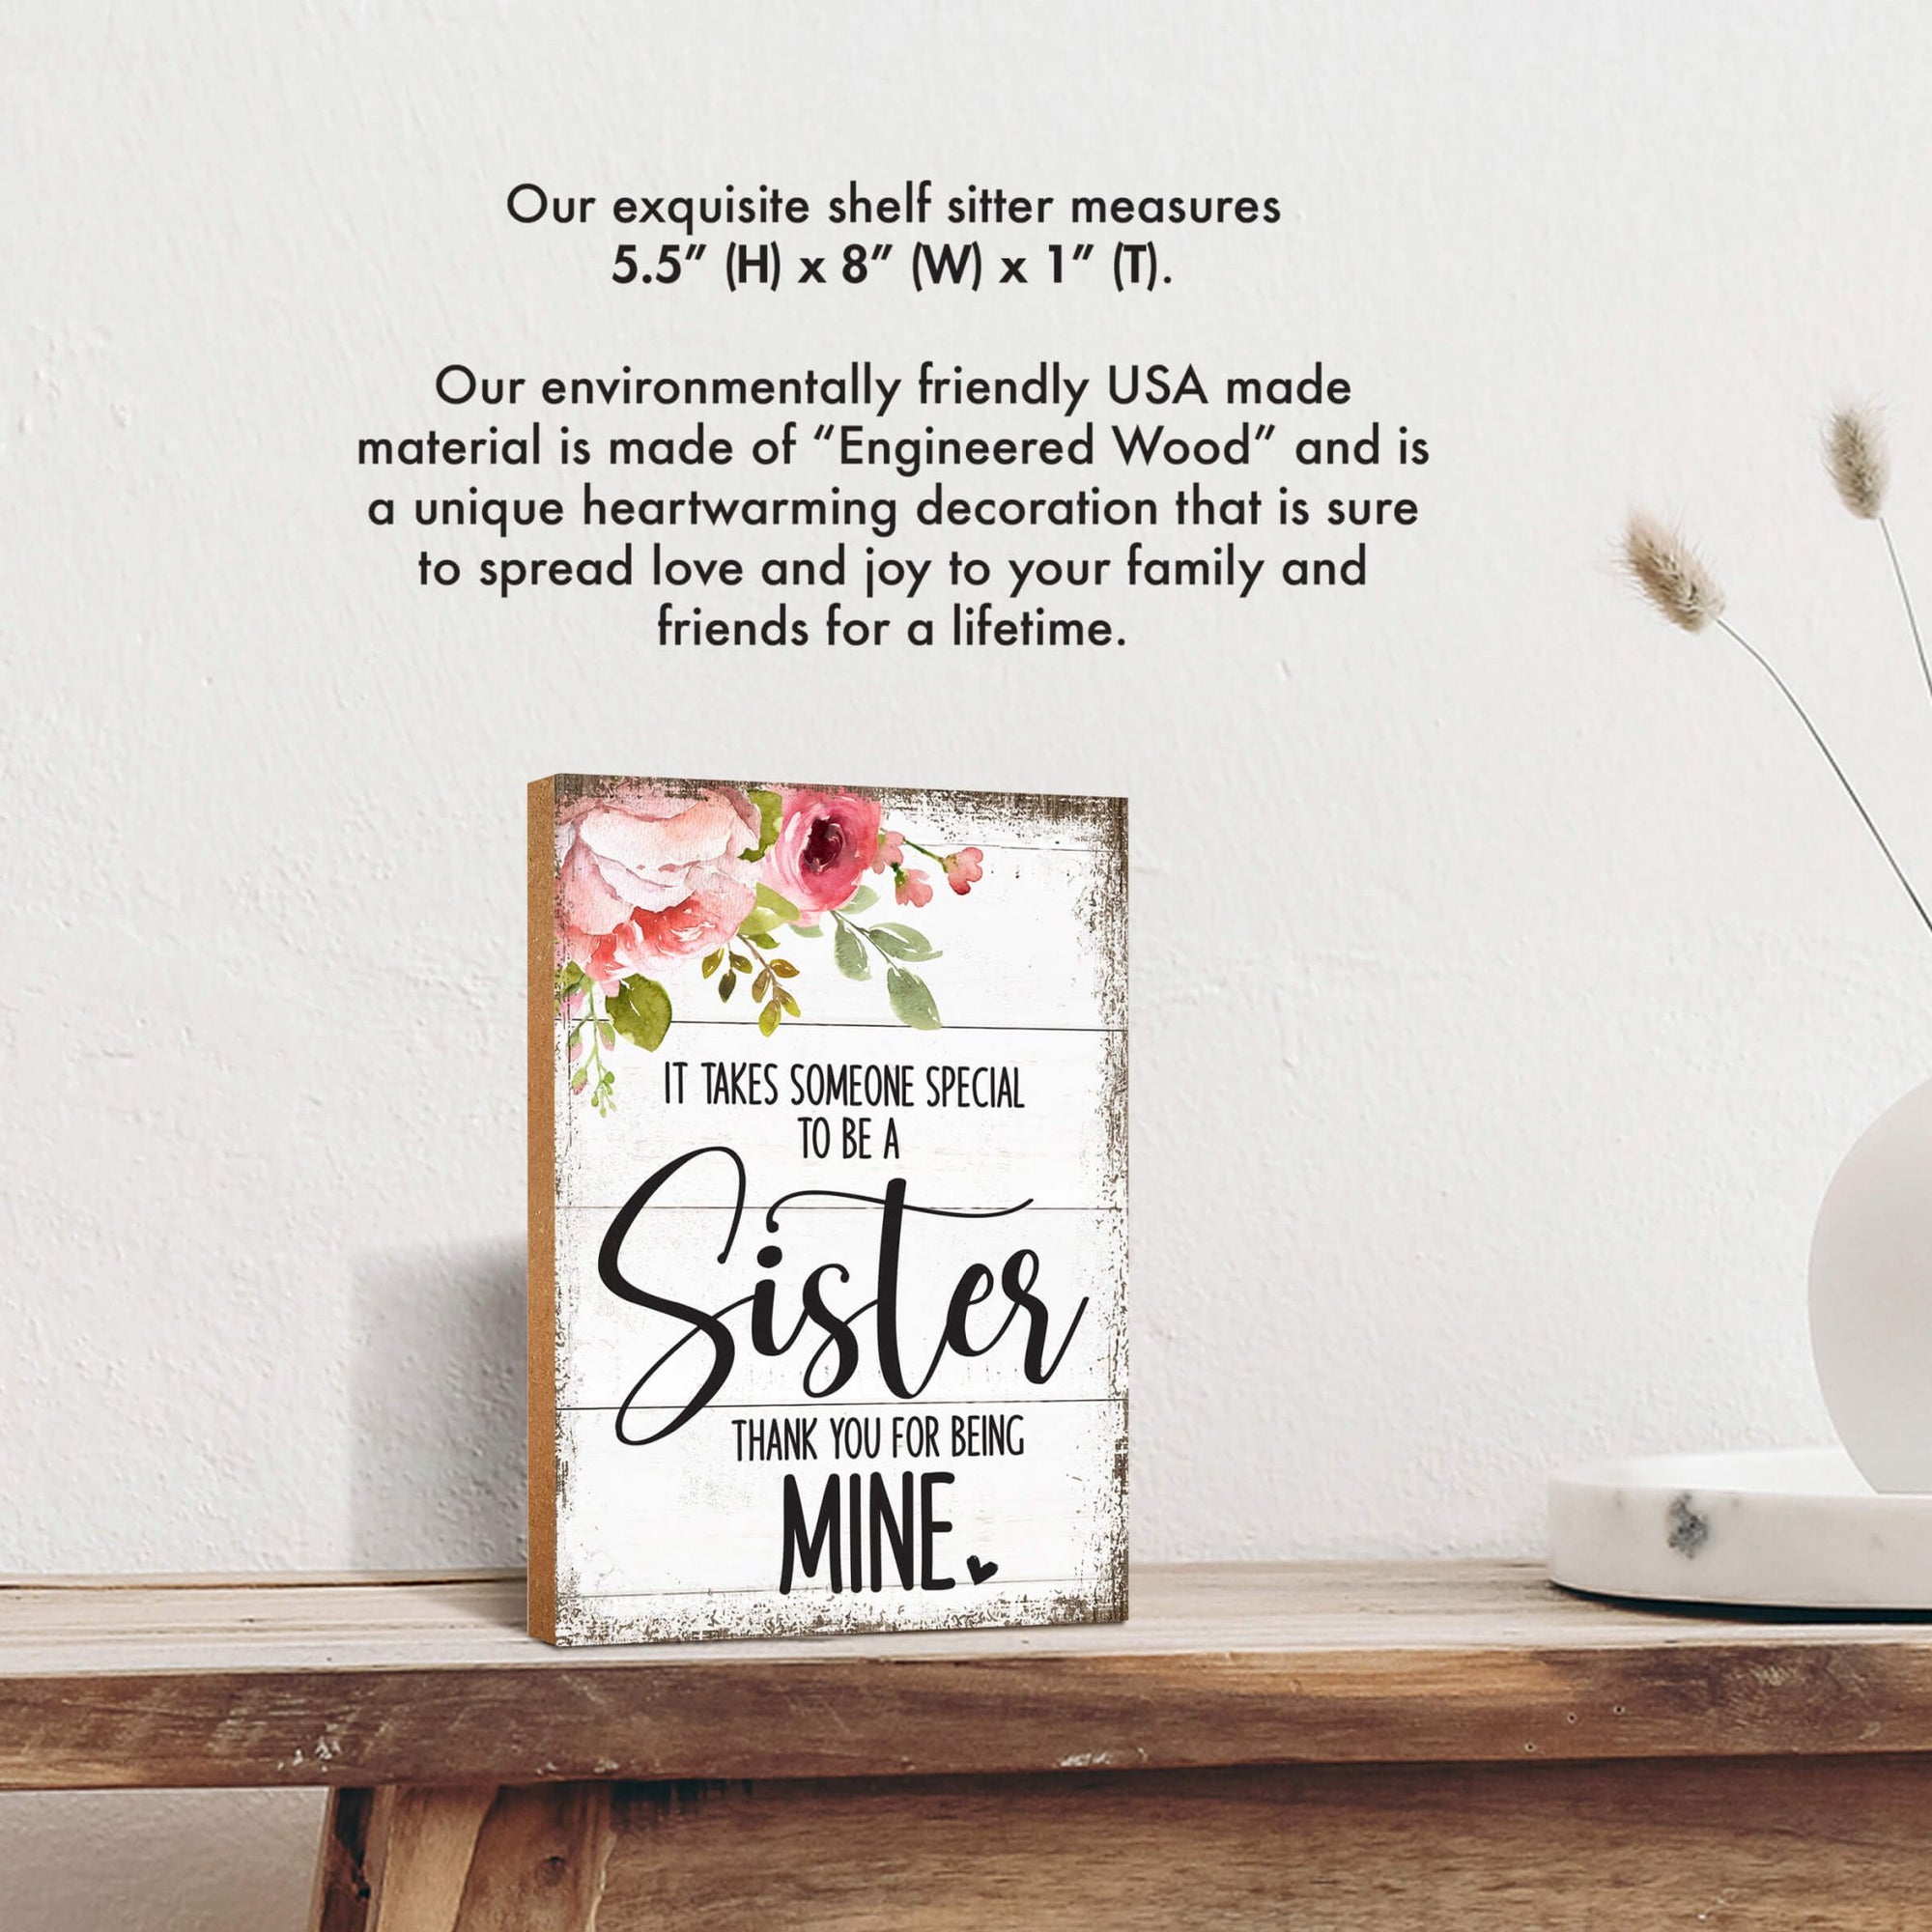 Lifesong Milestones Handcrafted Wooden Shelf Decor - Unique Mother's Day Gift for Sister